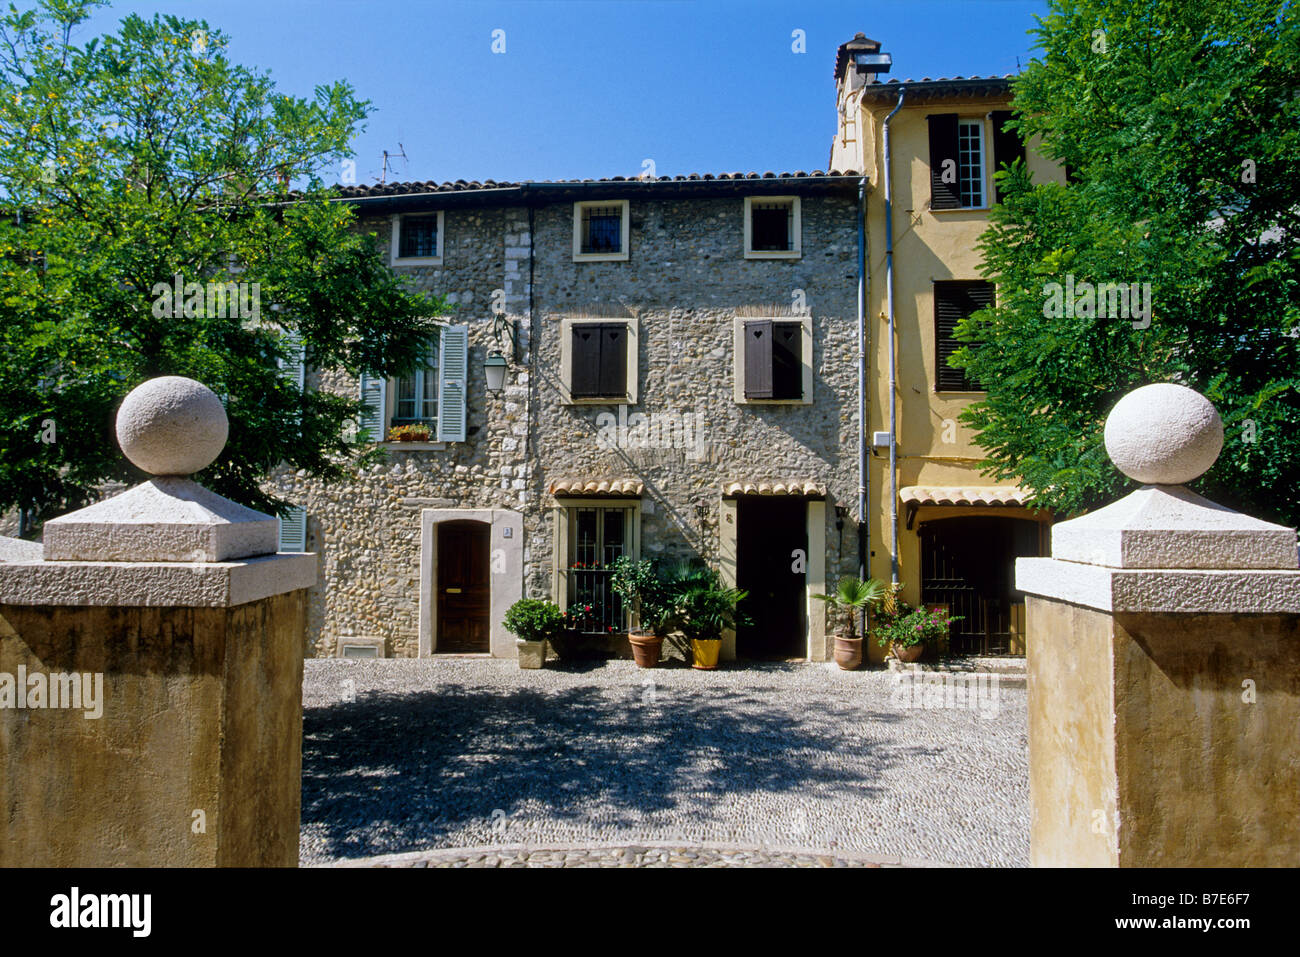 Medieval village of Cagnes sur mer Stock Photo